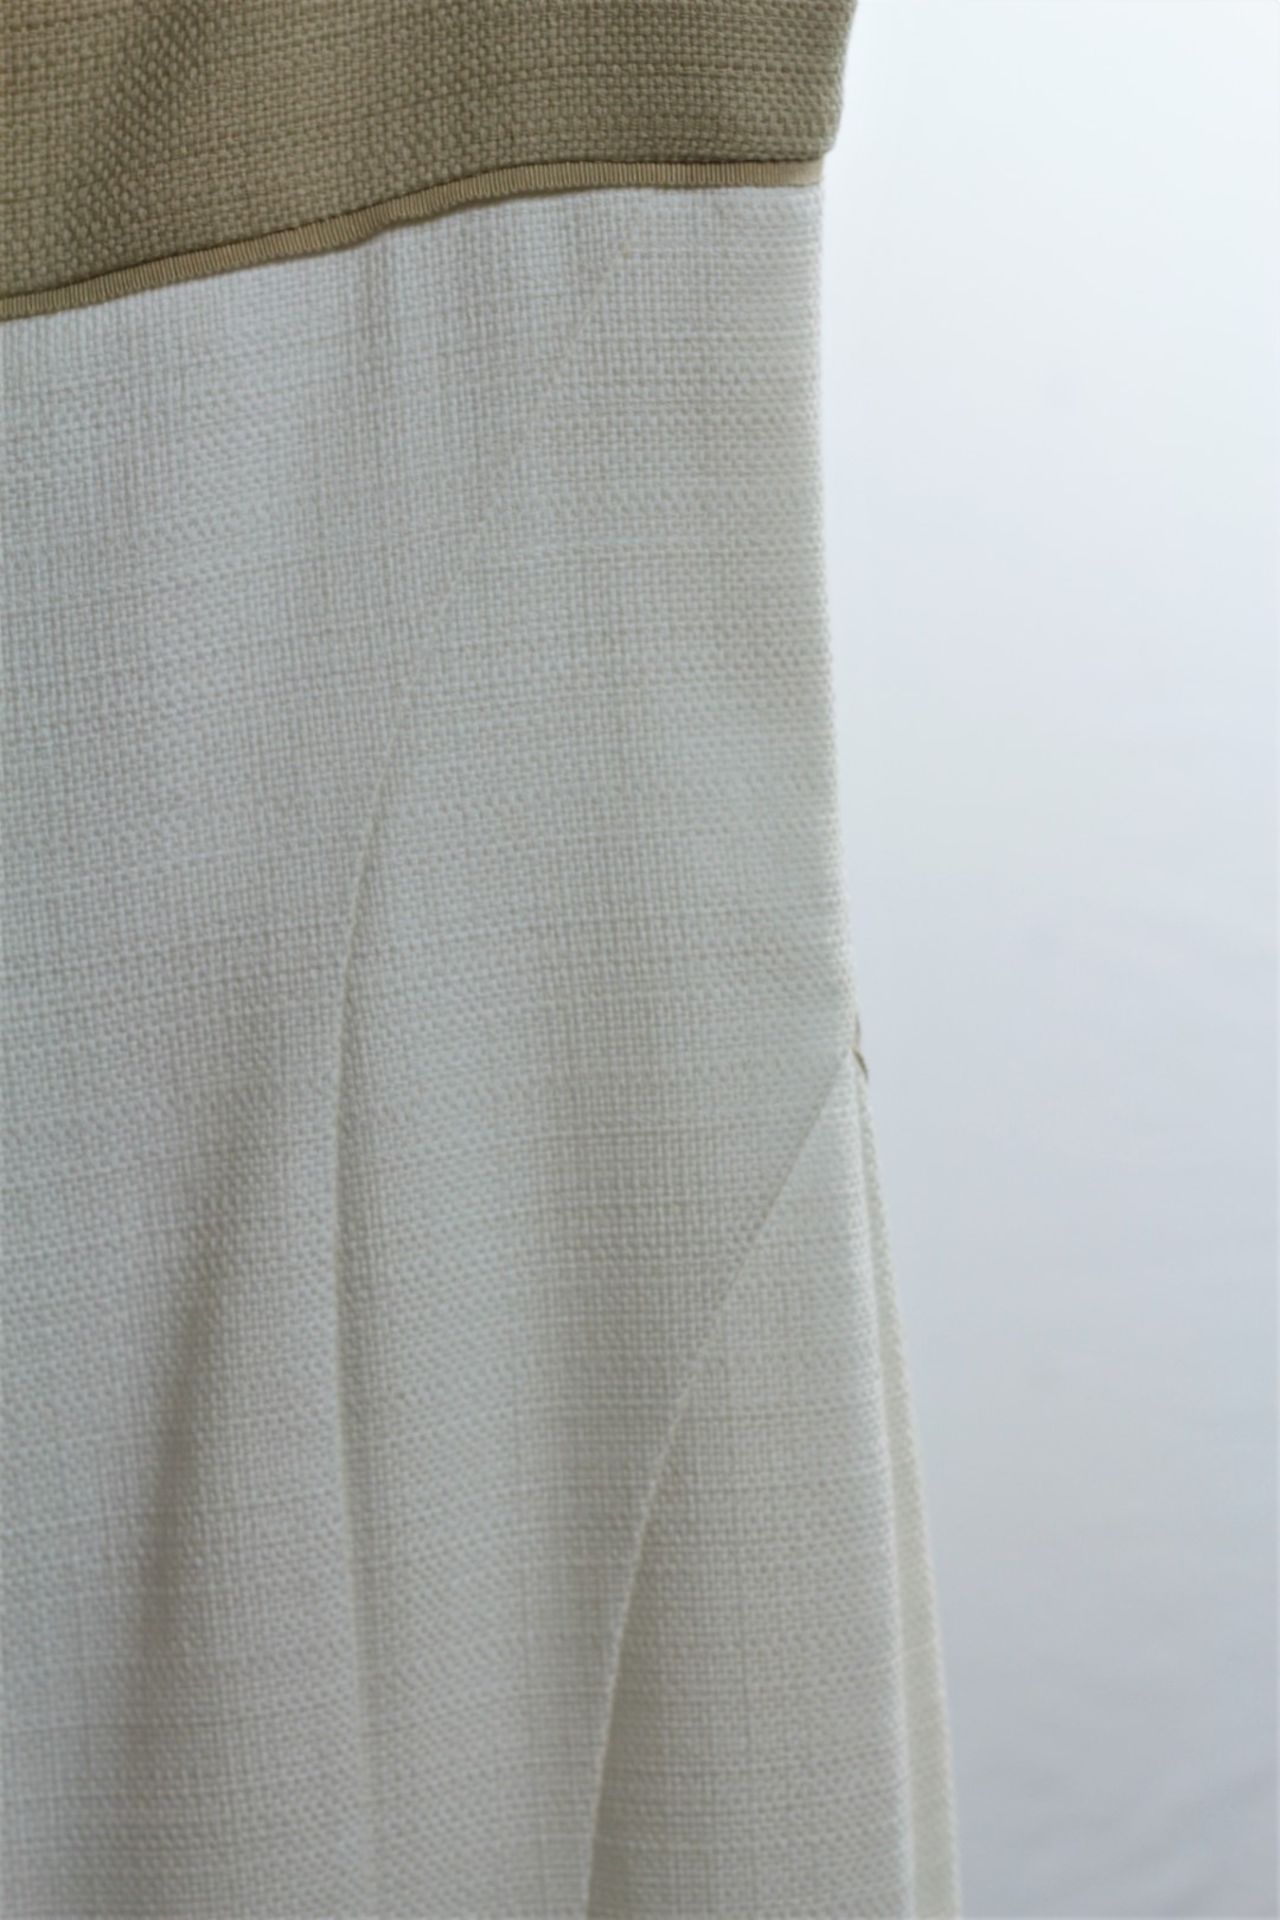 1 x Boutique Le Duc White/Faun Dress - Size: 12 - Material: 100% Cotton - From a High End Clothing - Image 3 of 14